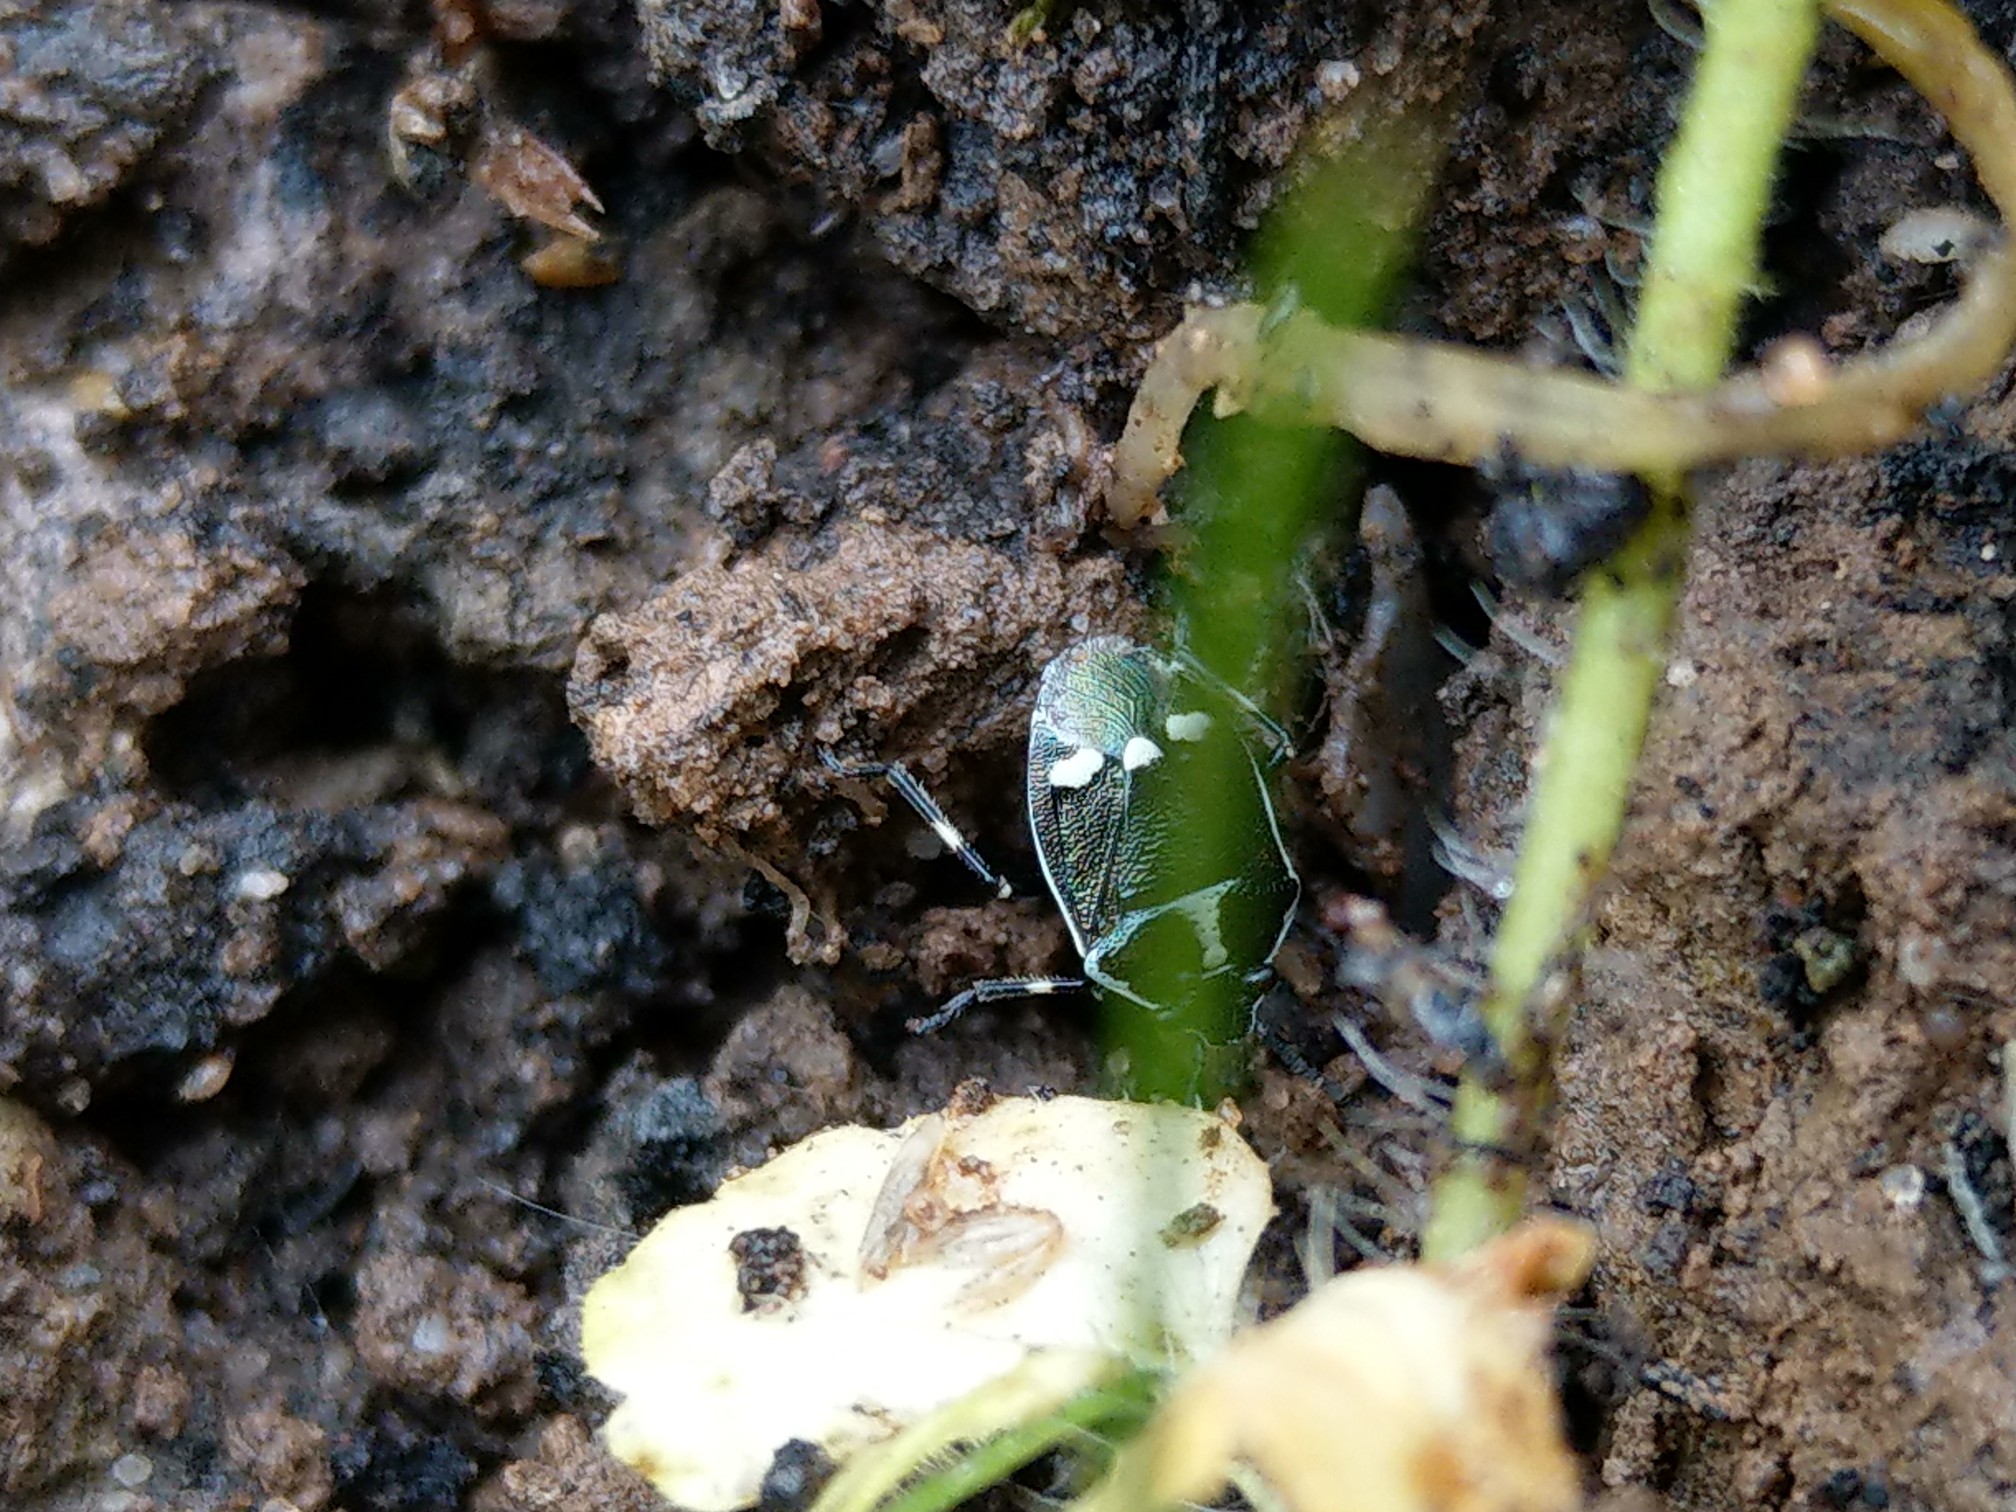 Cabbage or Brassica bug